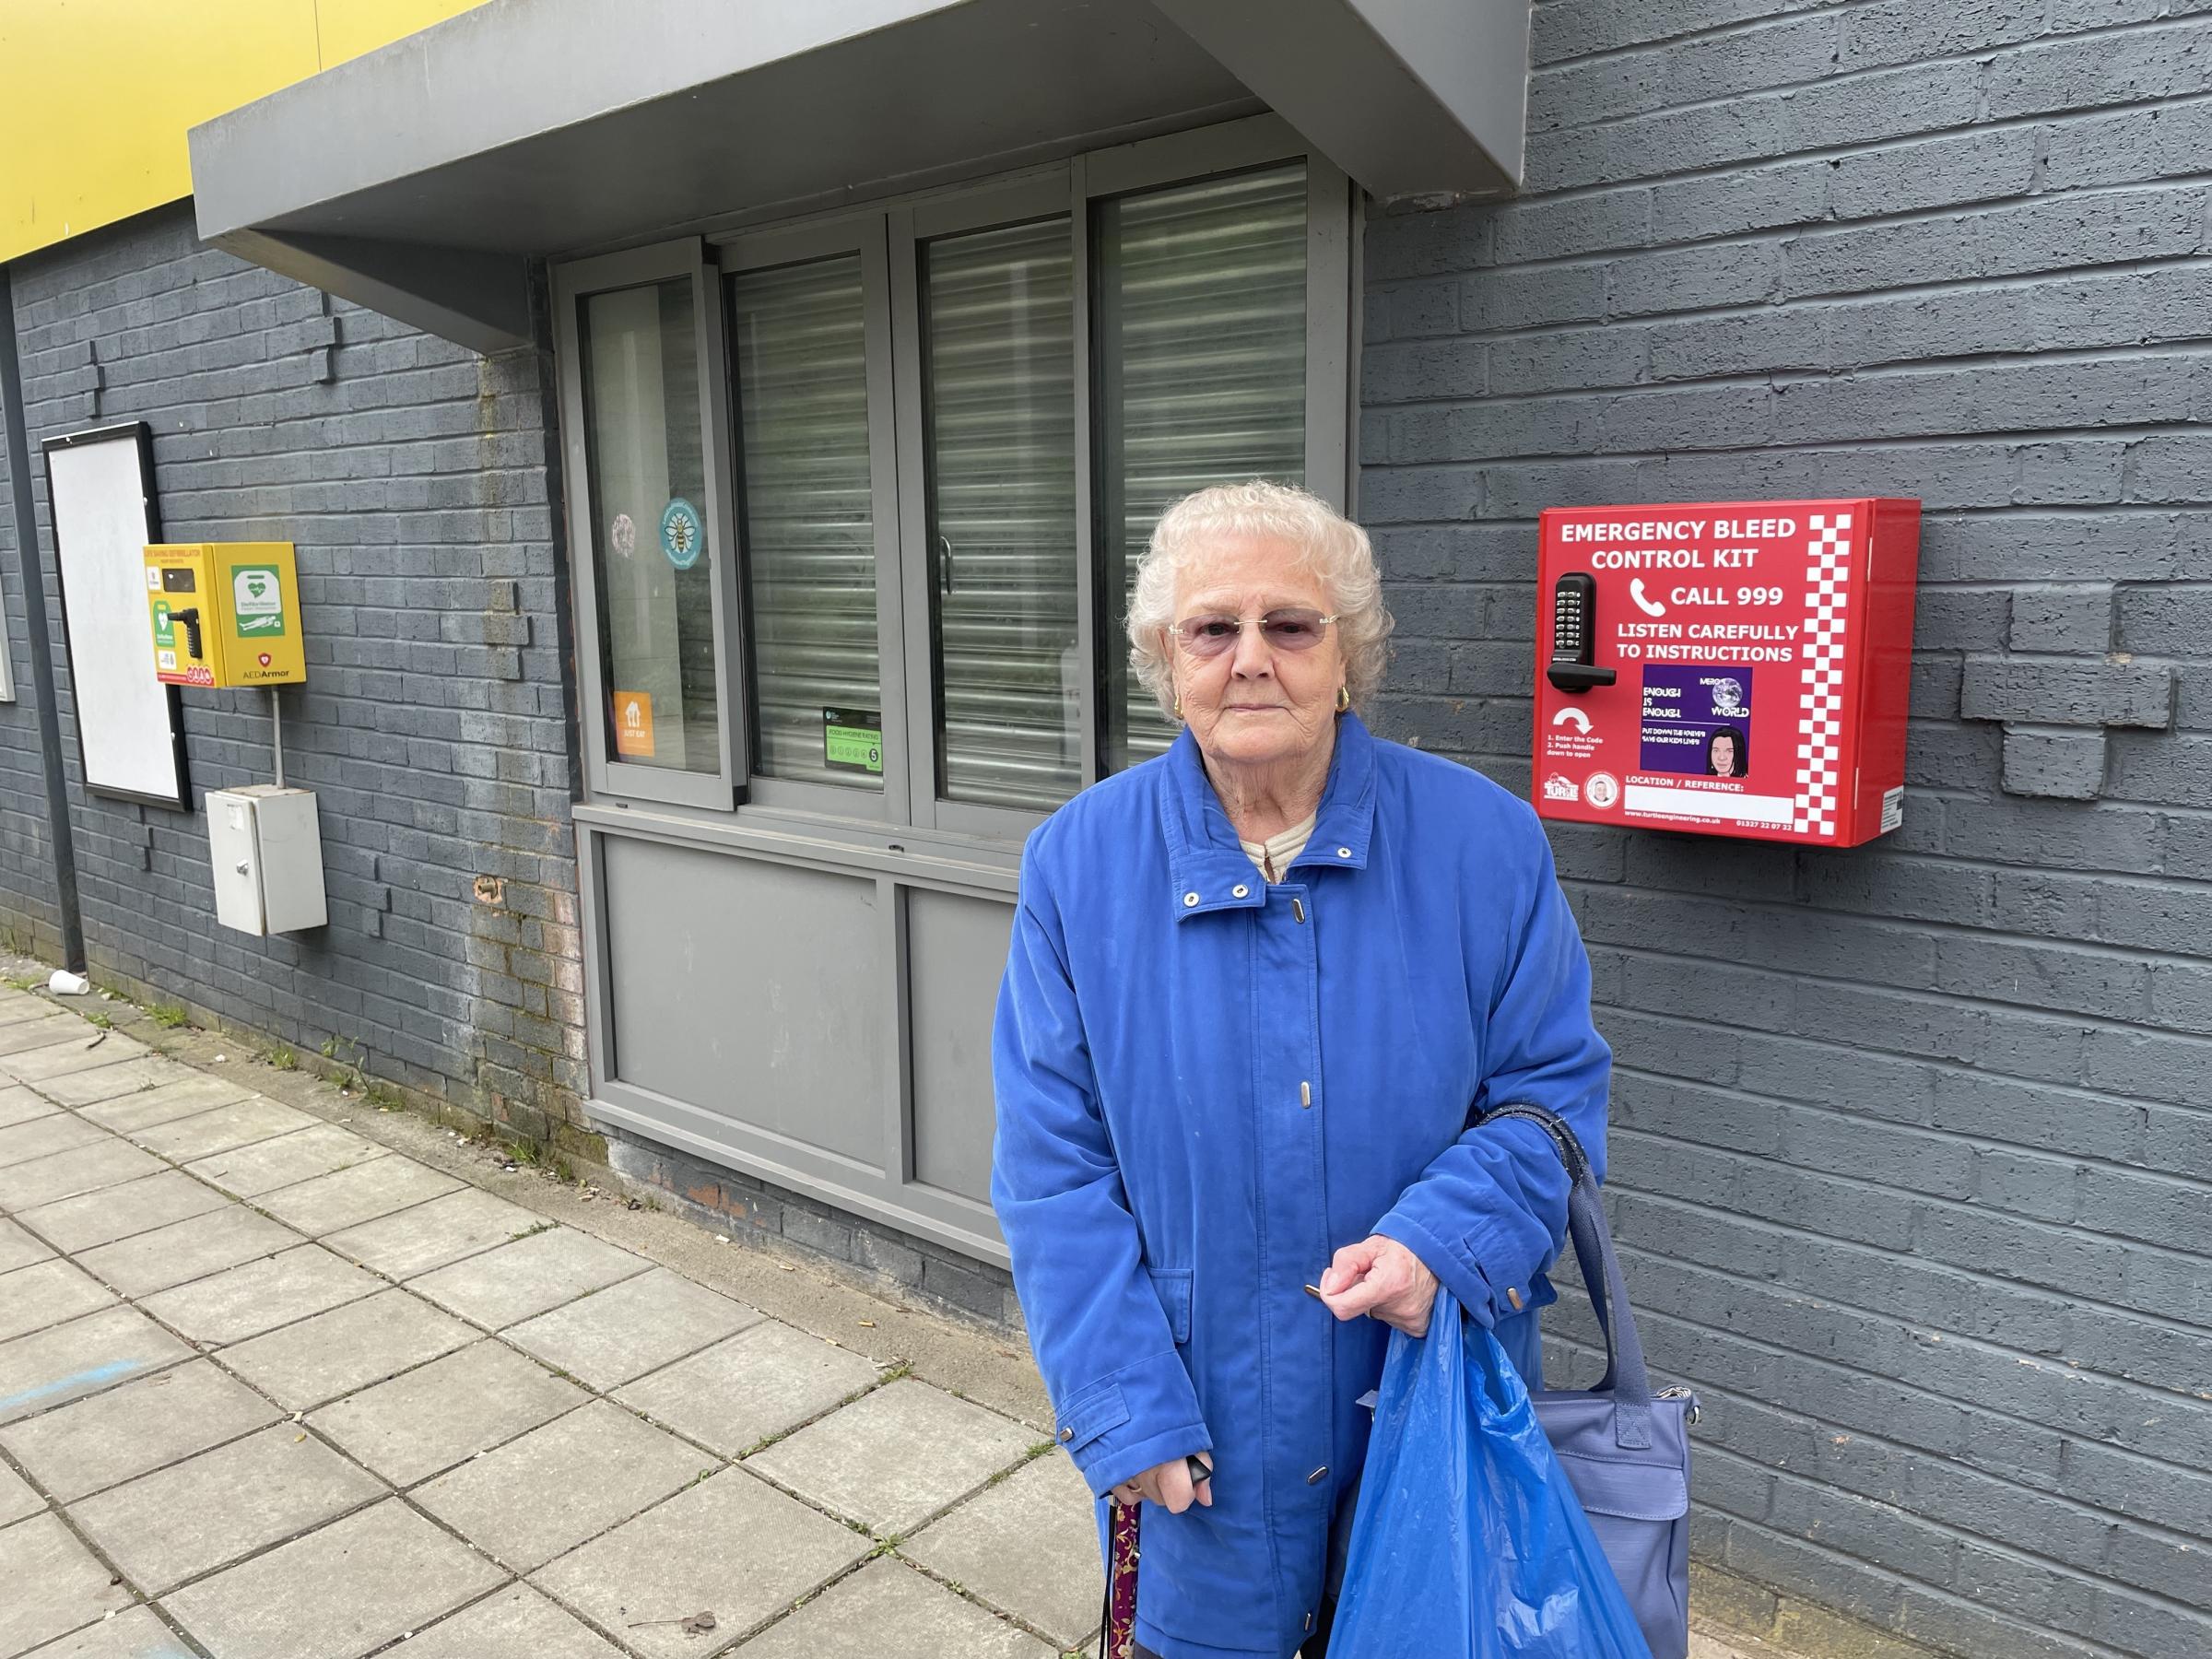 Sheila Green, 87, has lived in Radcliffe all her life